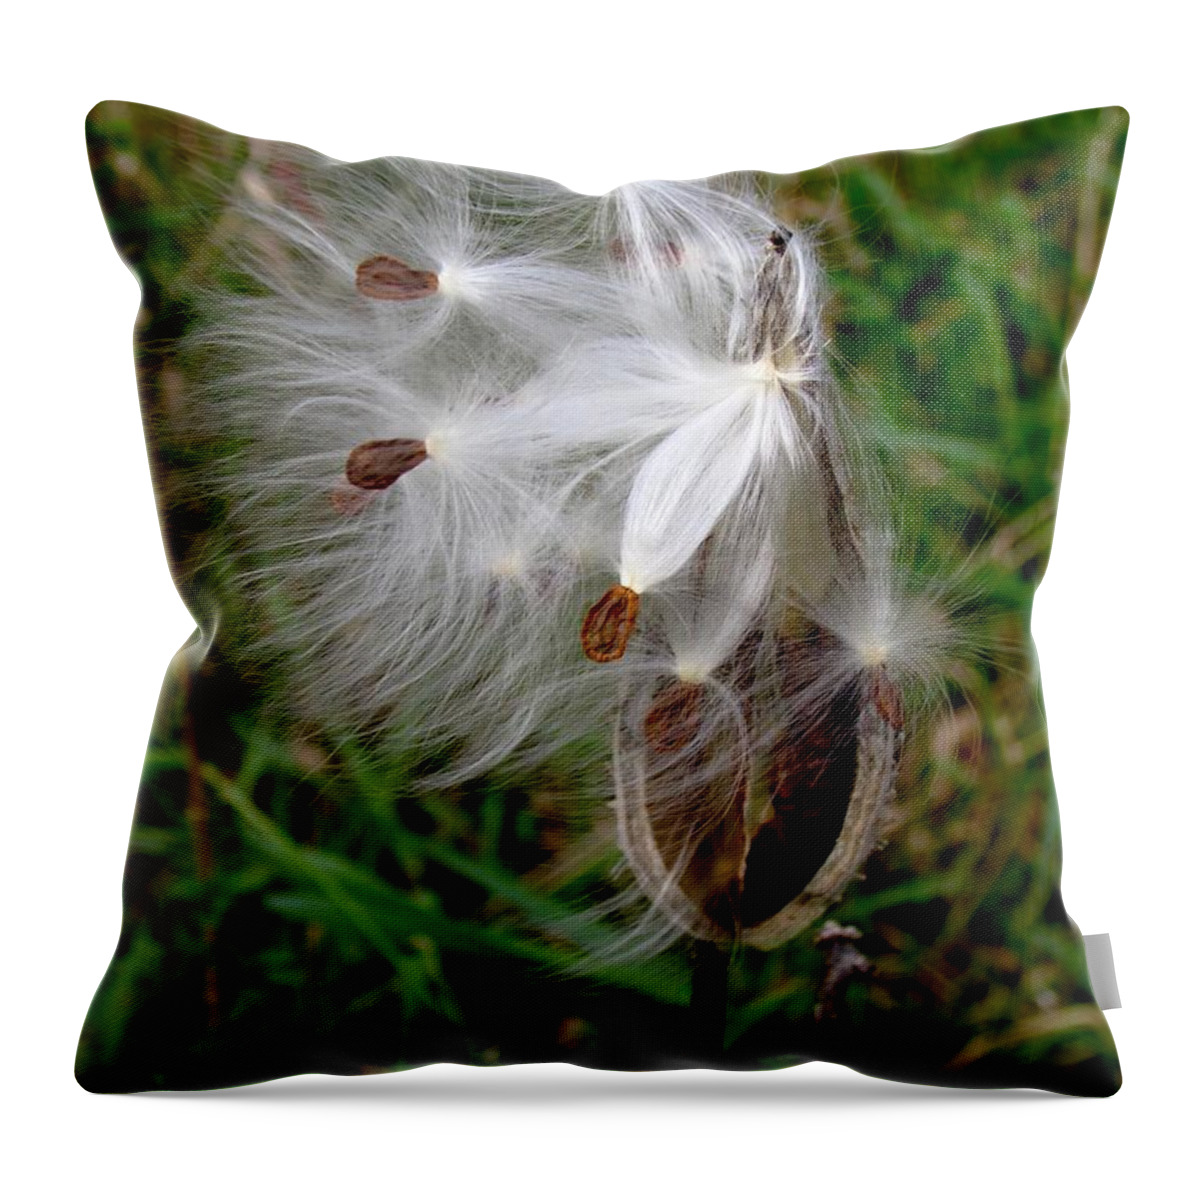 Milkweed Throw Pillow featuring the photograph Wind Dancers by Pamela Clements